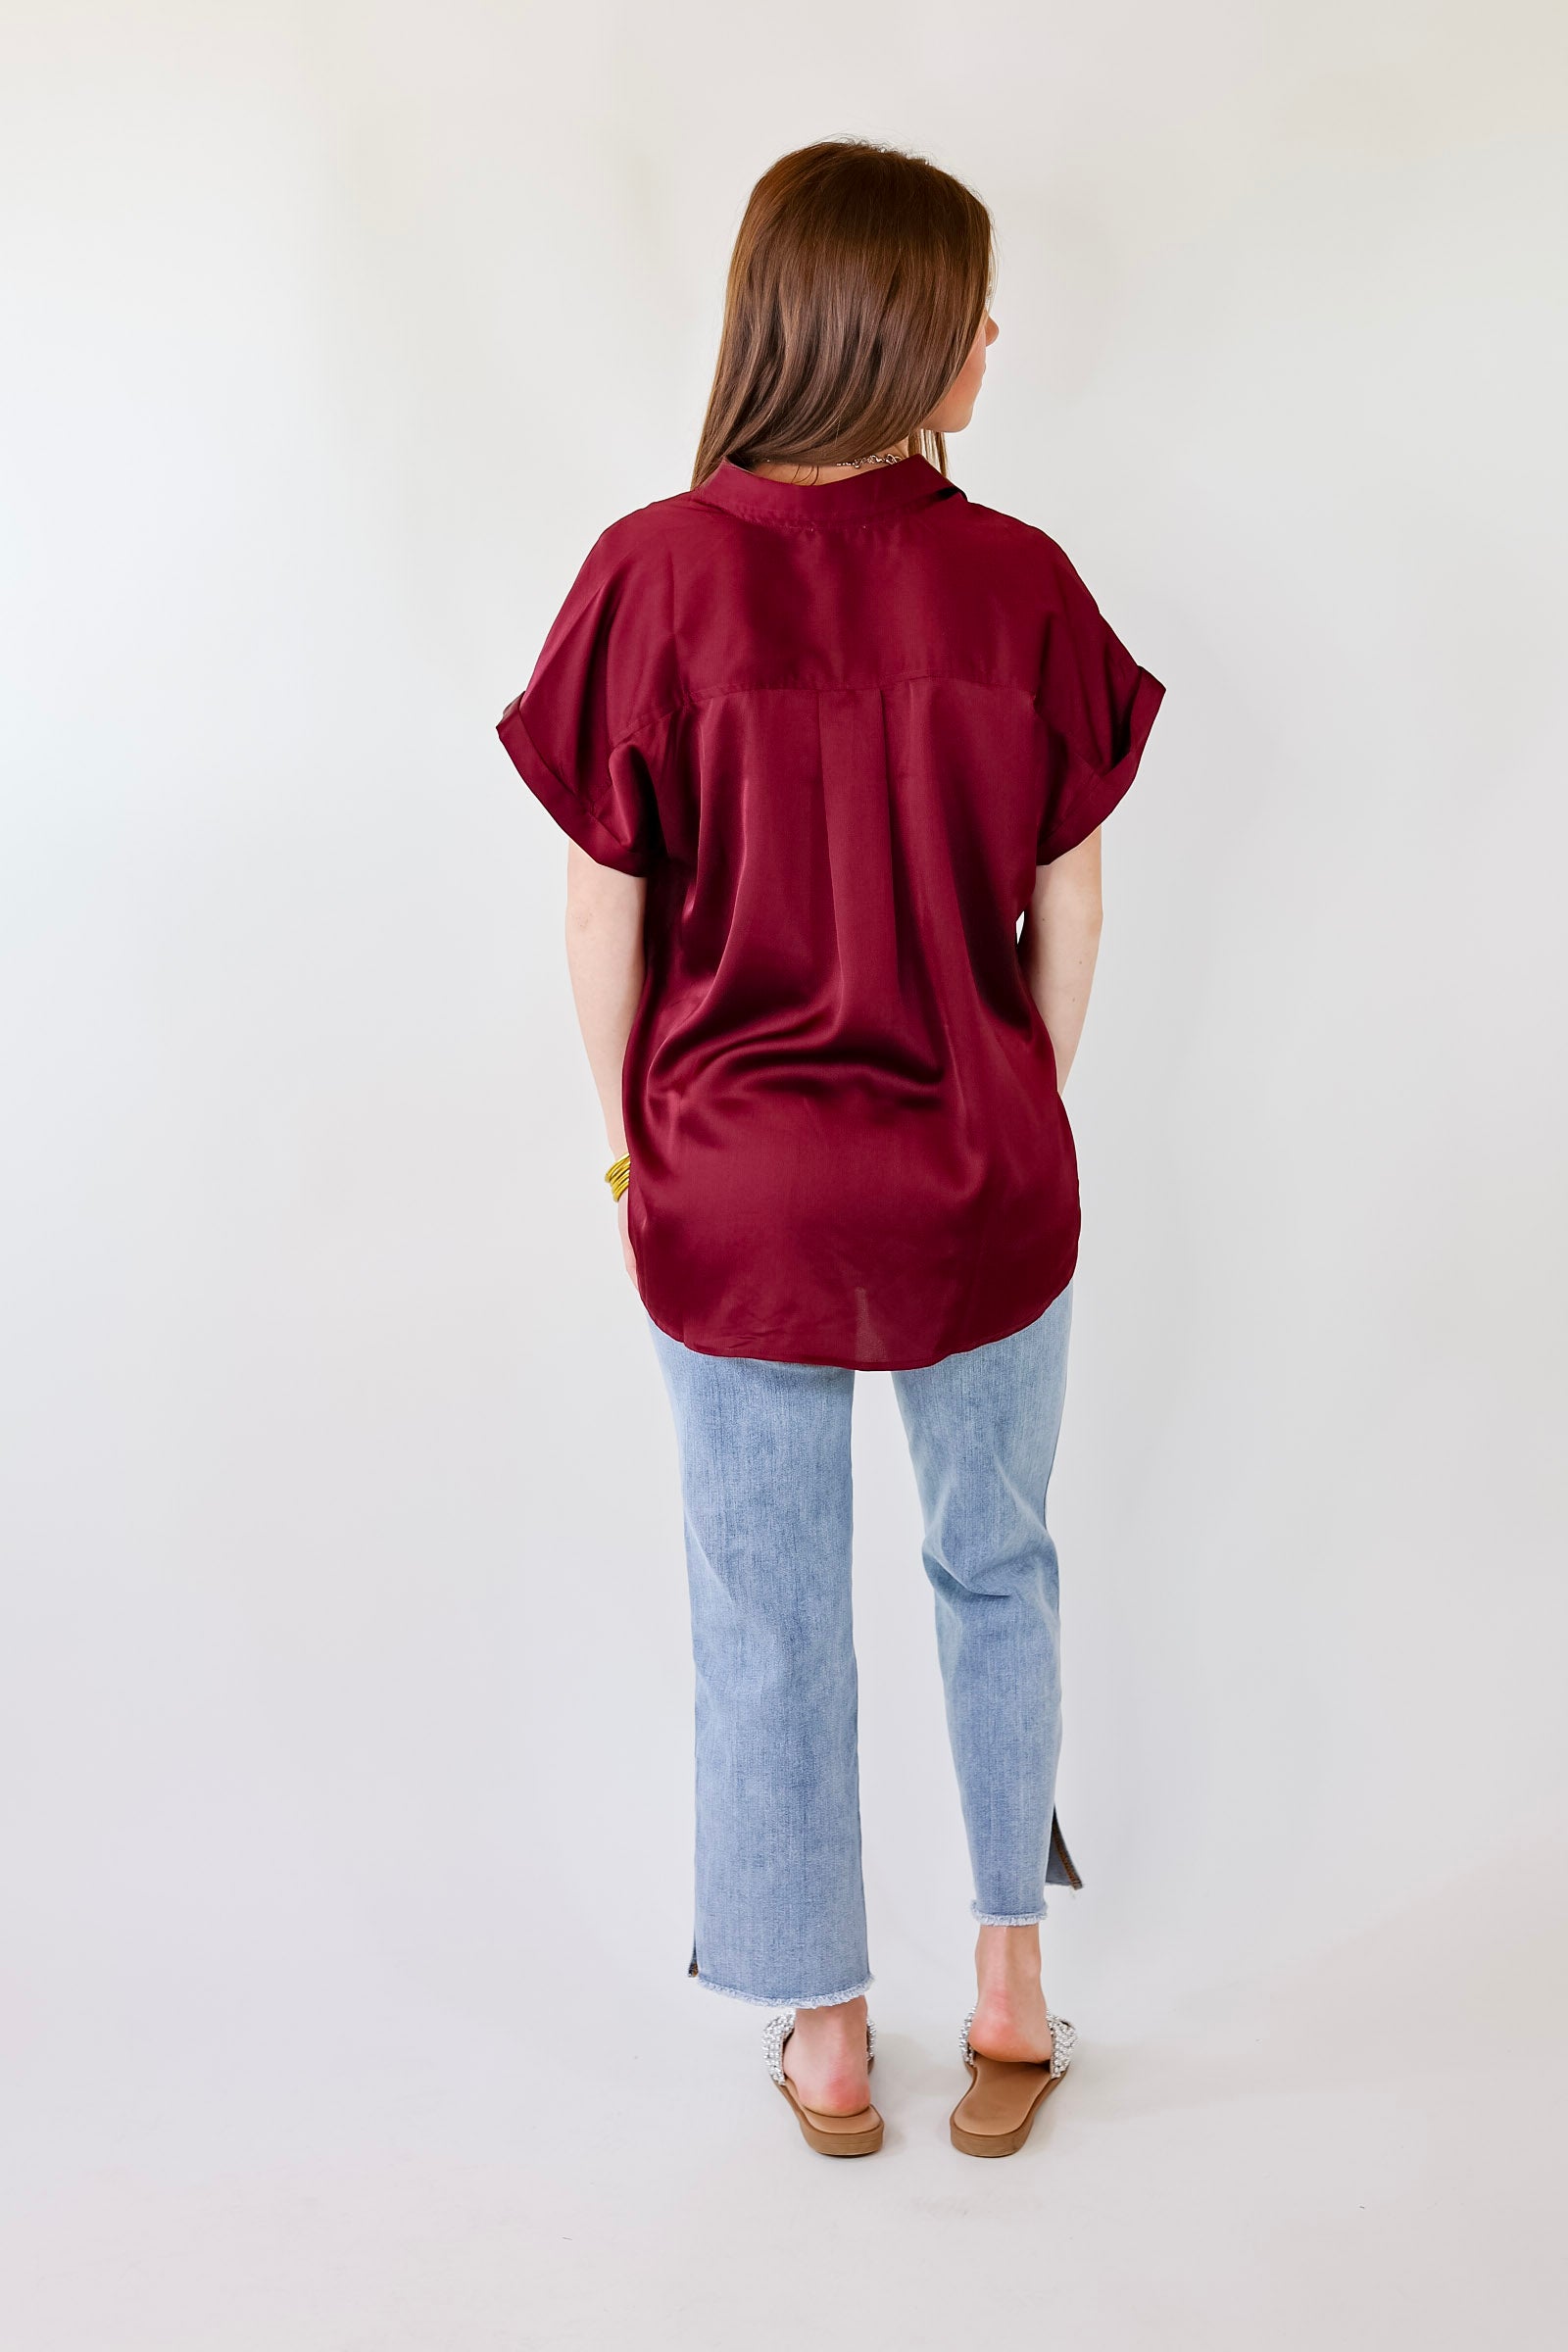 Free To Be Fab Button Up Short Sleeve Top in  Maroon - Giddy Up Glamour Boutique